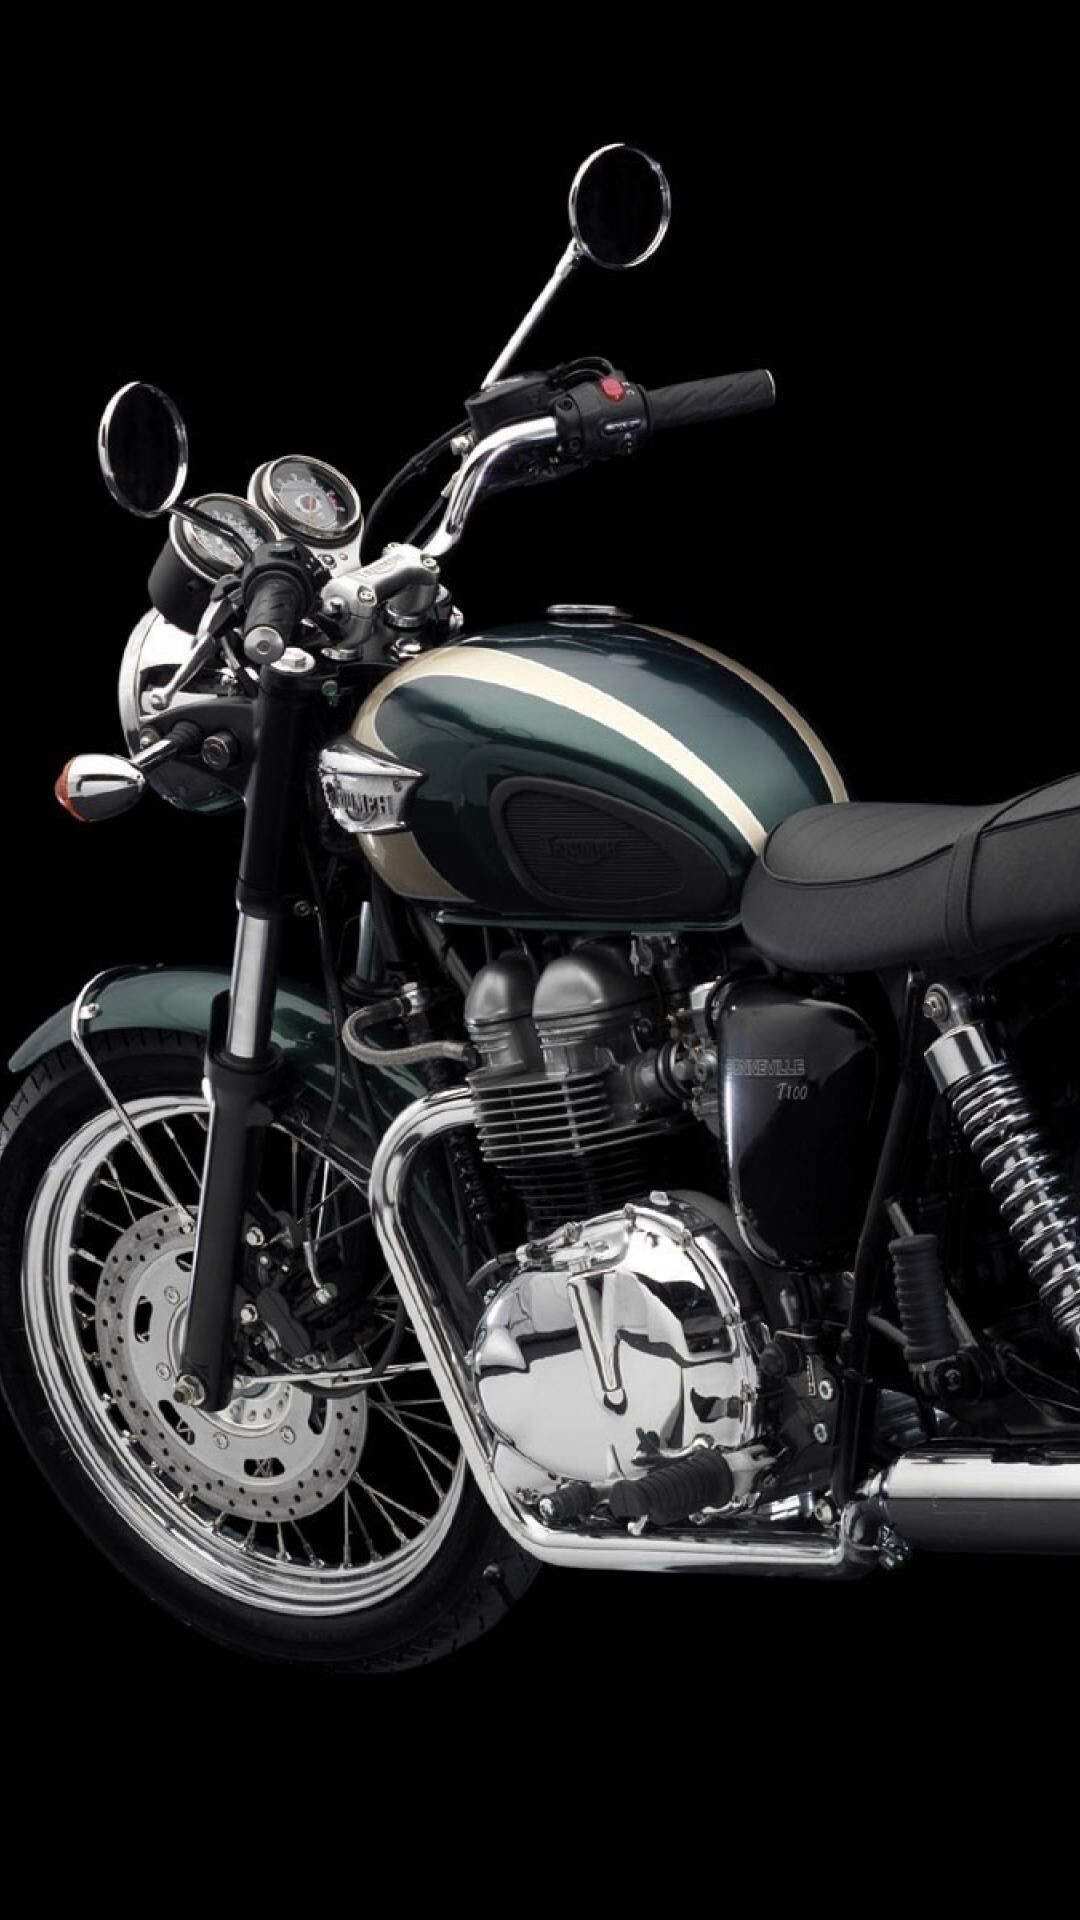 Triumph Motorcycles: Bonneville, A standard motorcycle featuring a parallel-twin four-stroke engine. 1080x1920 Full HD Background.